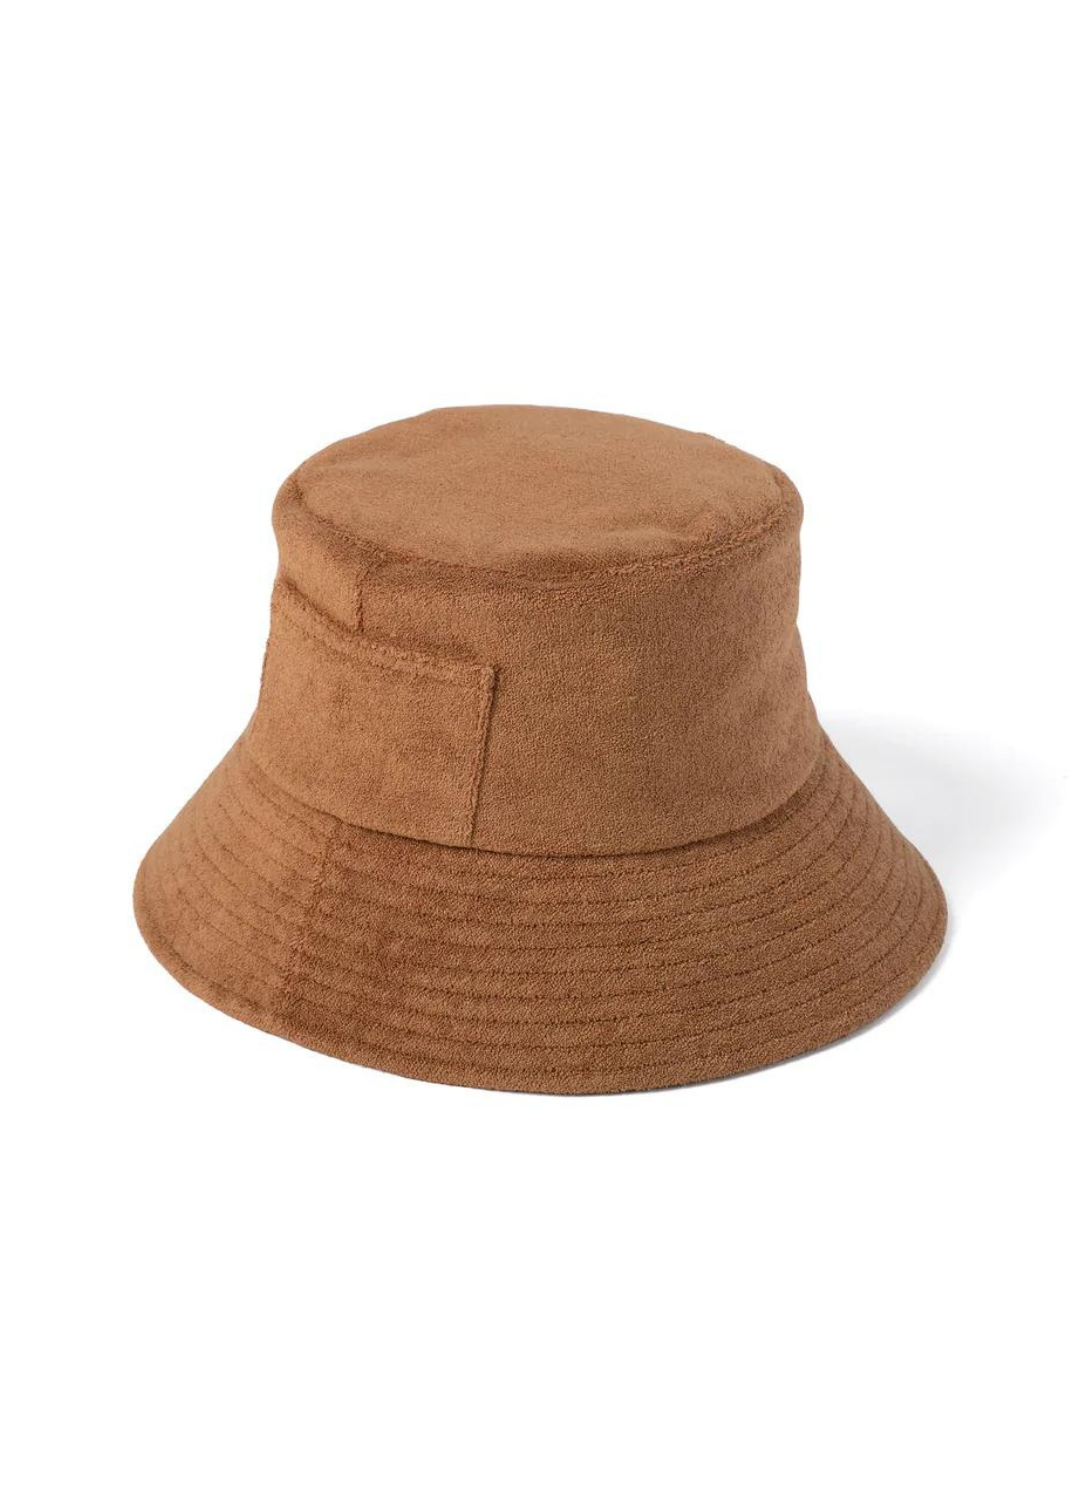 The Wave Bucket in Coffee Terry